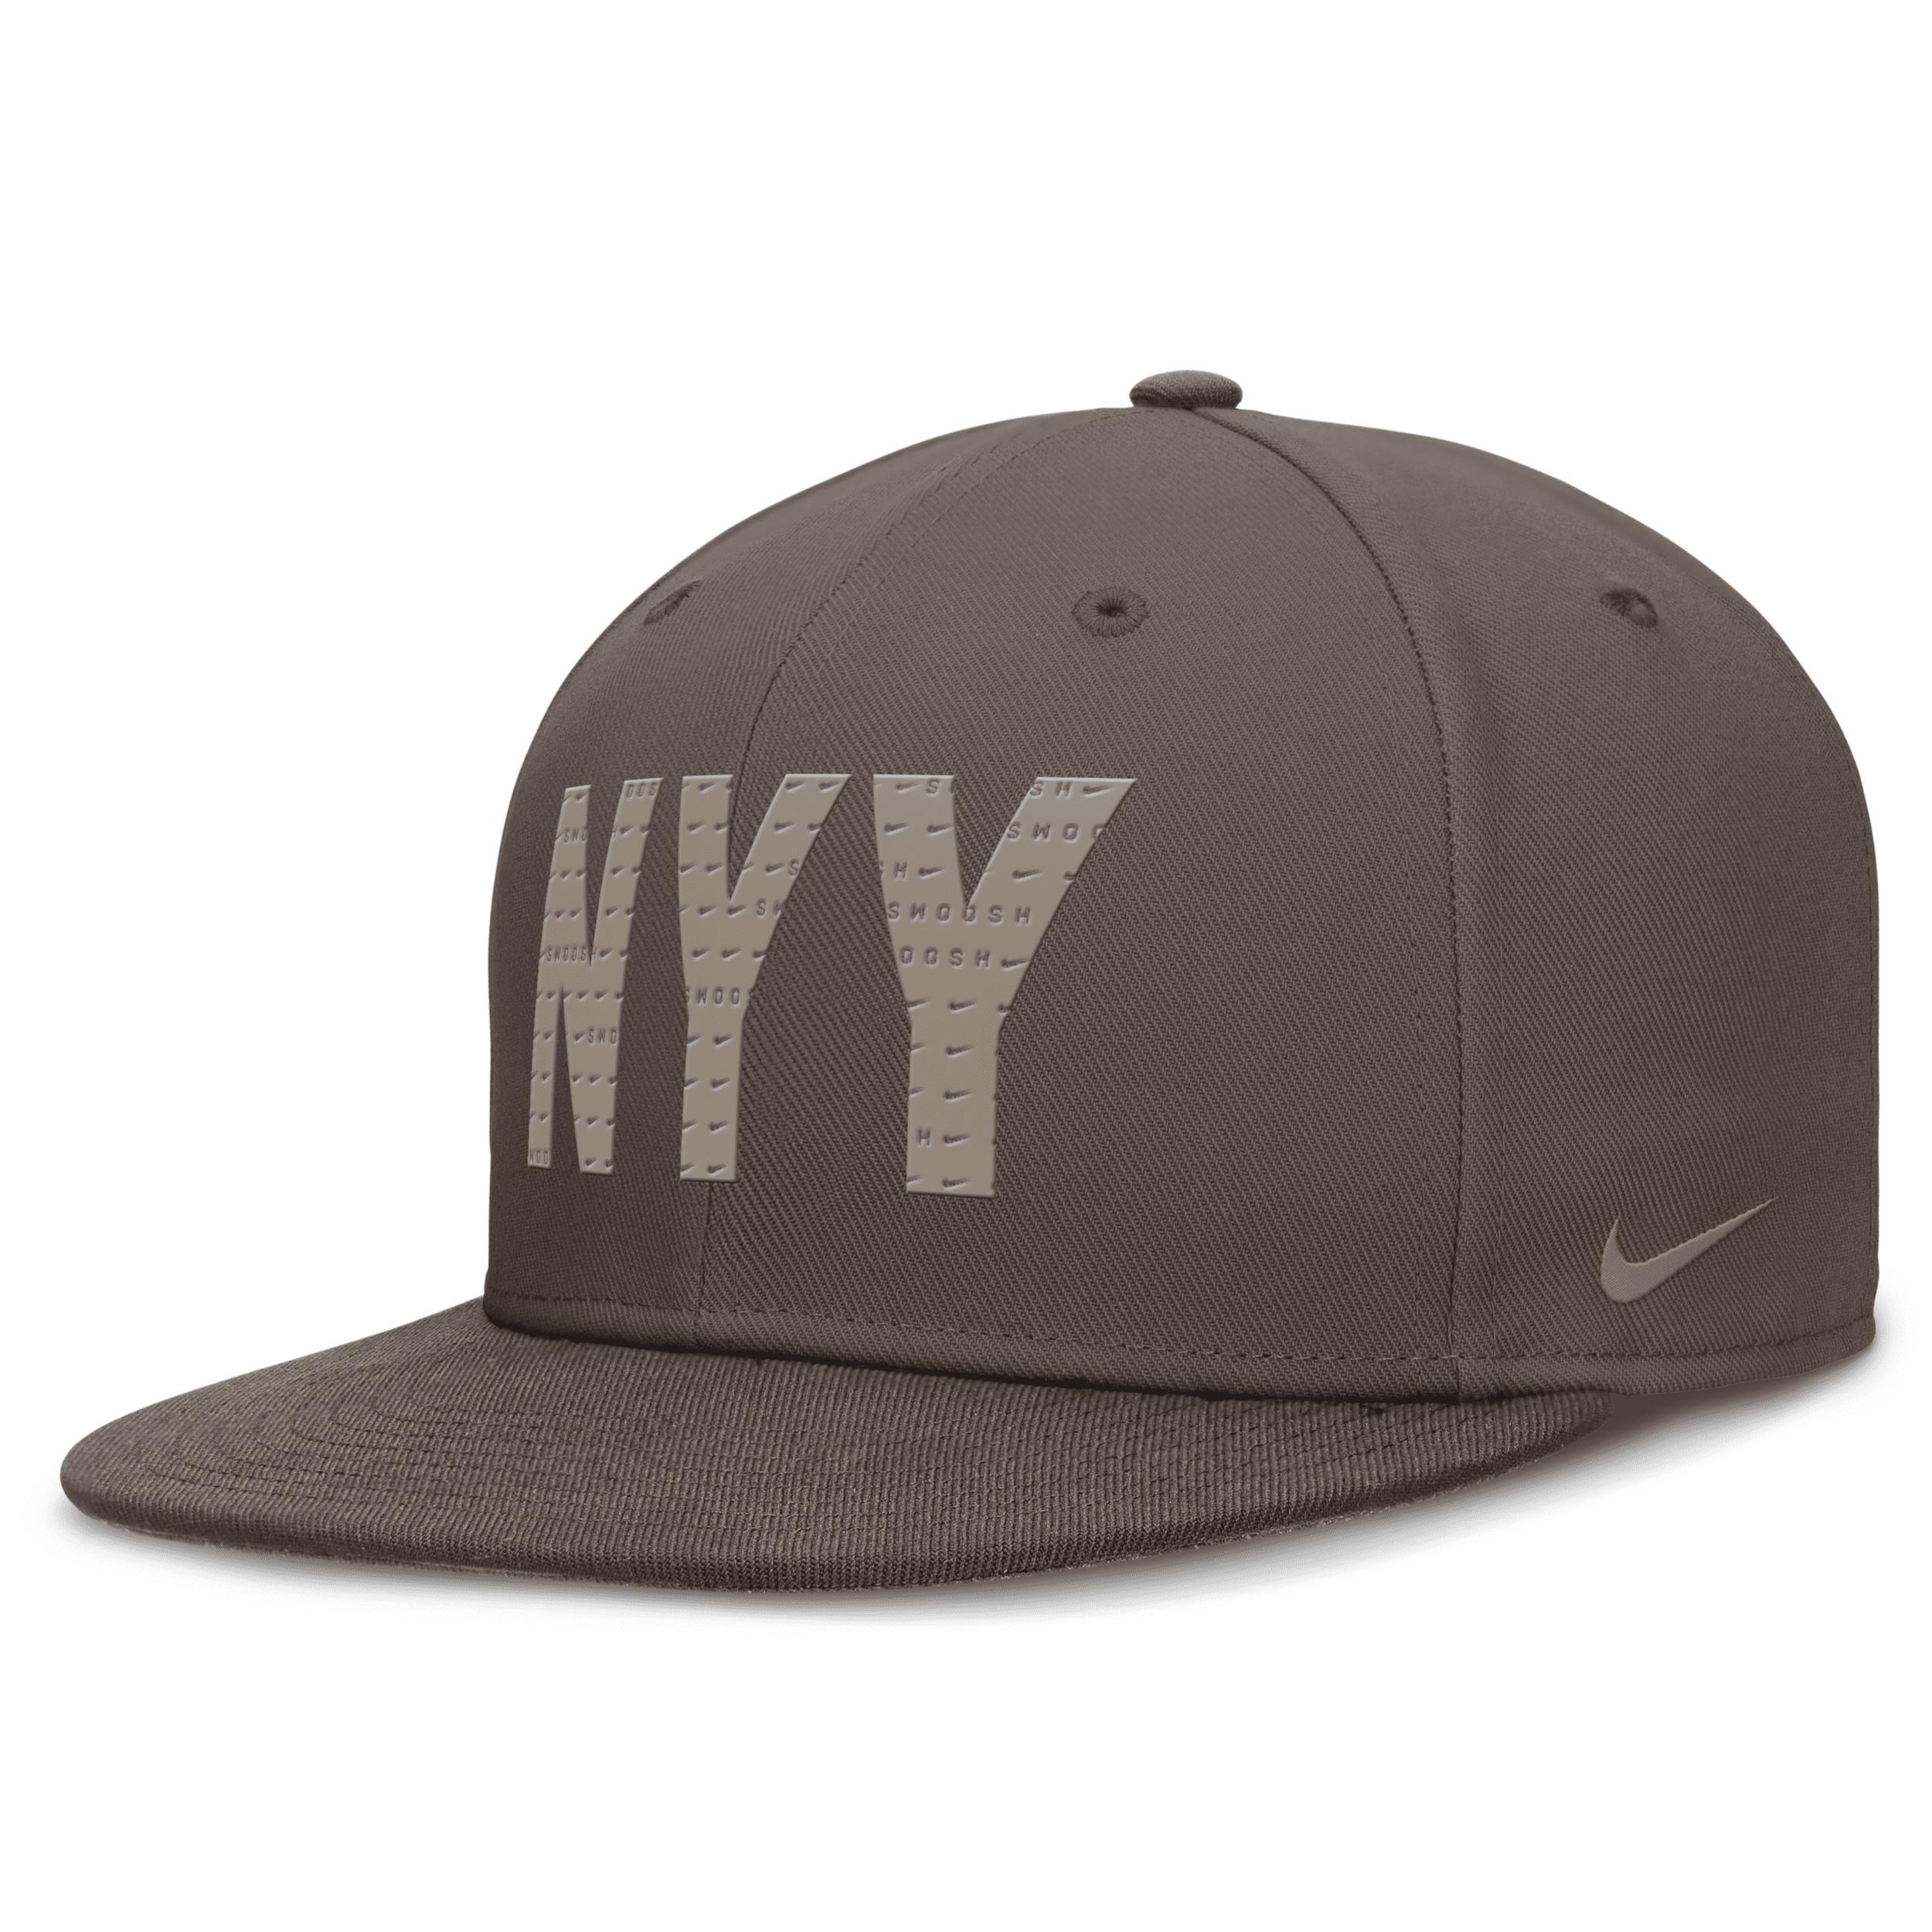 New York Yankees Statement True Nike Men's Dri-FIT MLB Fitted Hat Product Image